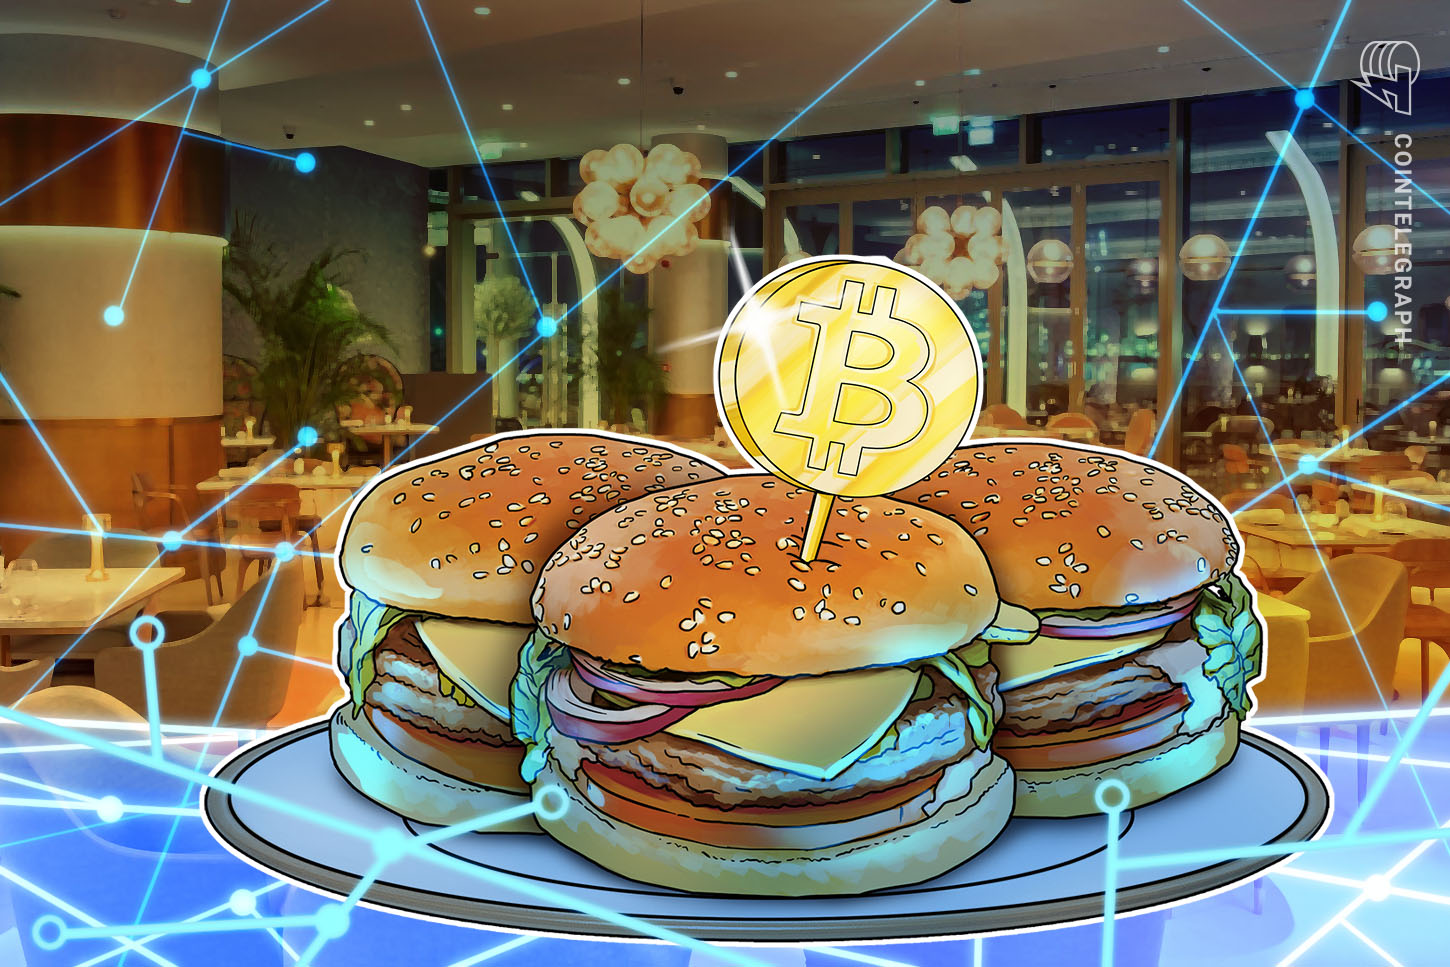 Center Japanese Restaurant Chain Converts Complete Reserves to BTC